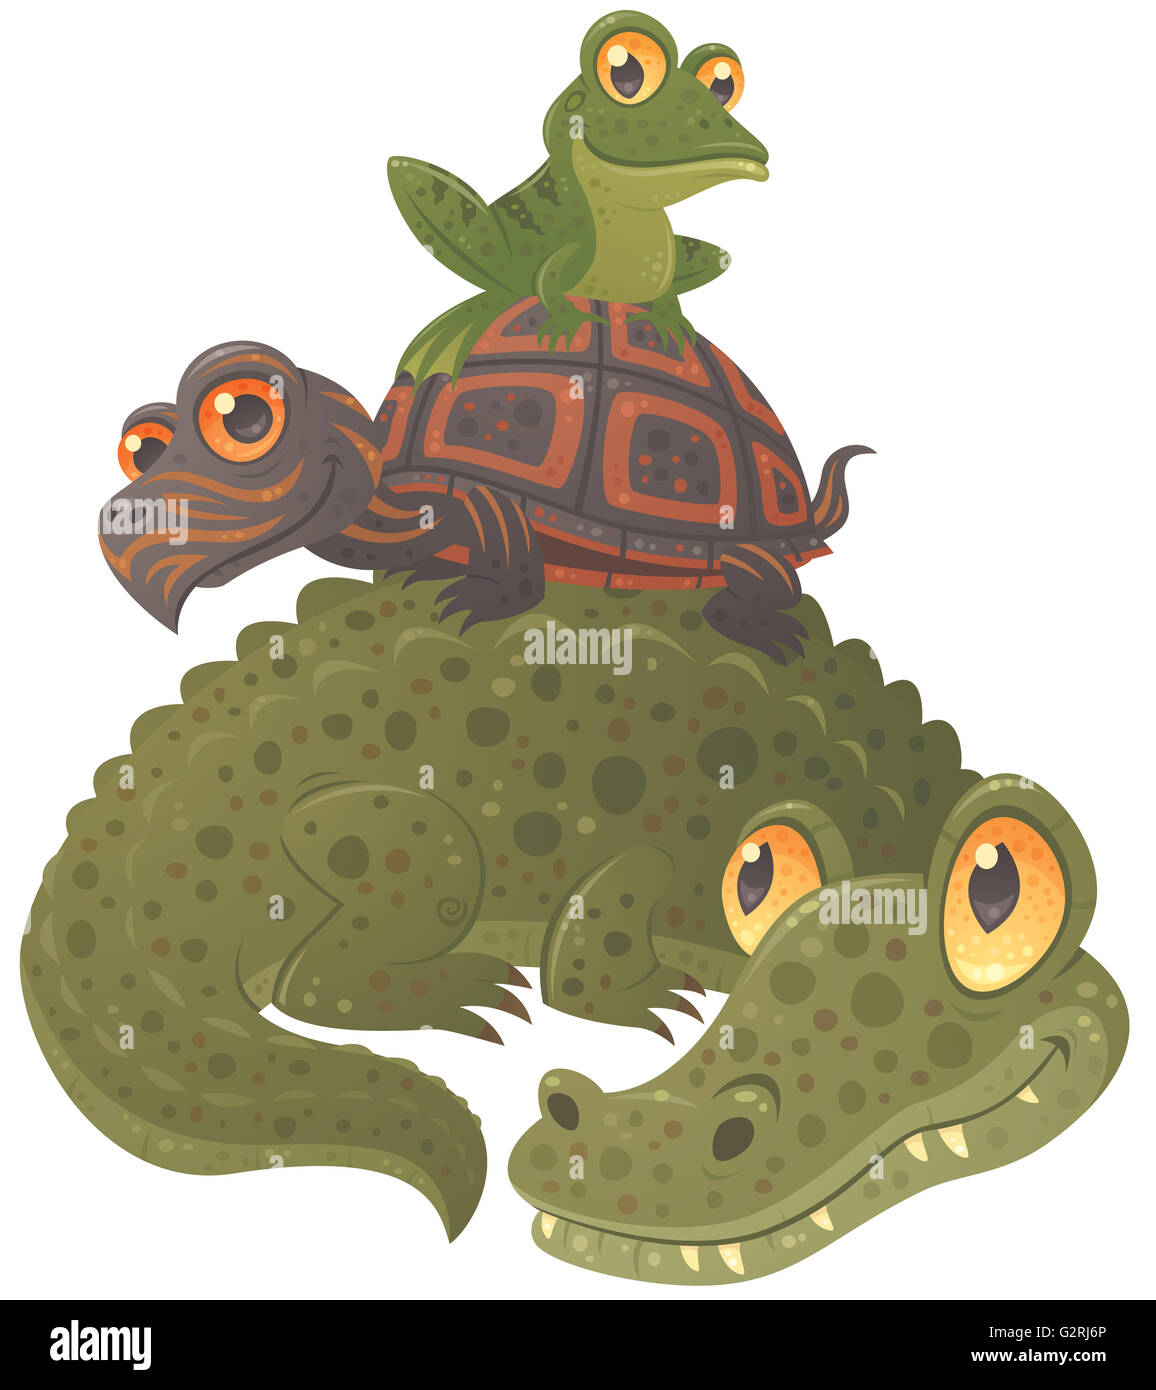 Cartoon vector illustration of an alligator, a turtle and a frog hanging out together, stacked in a pyramid. Stock Photo